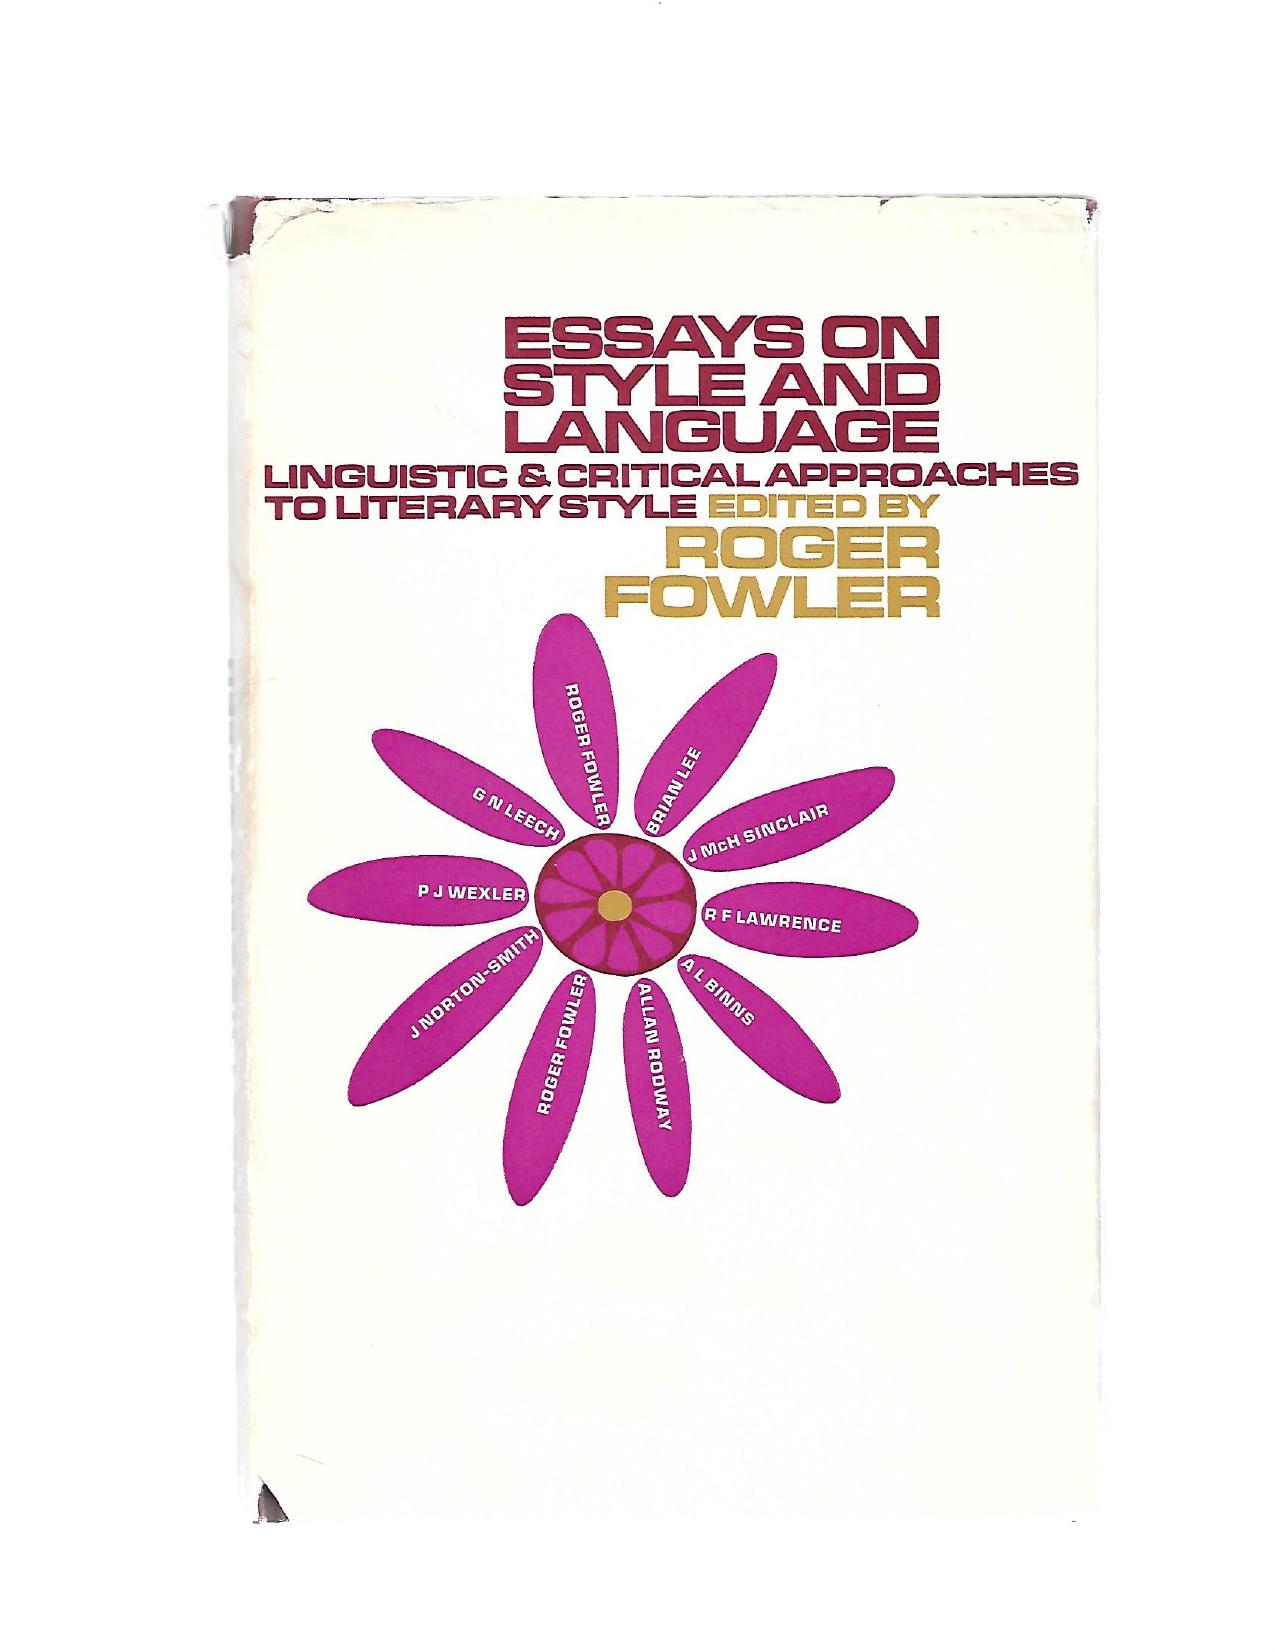 Essays on Style and Language. Linguistic and Critical Approaches to Literary Style. Edited by Roger Fowler